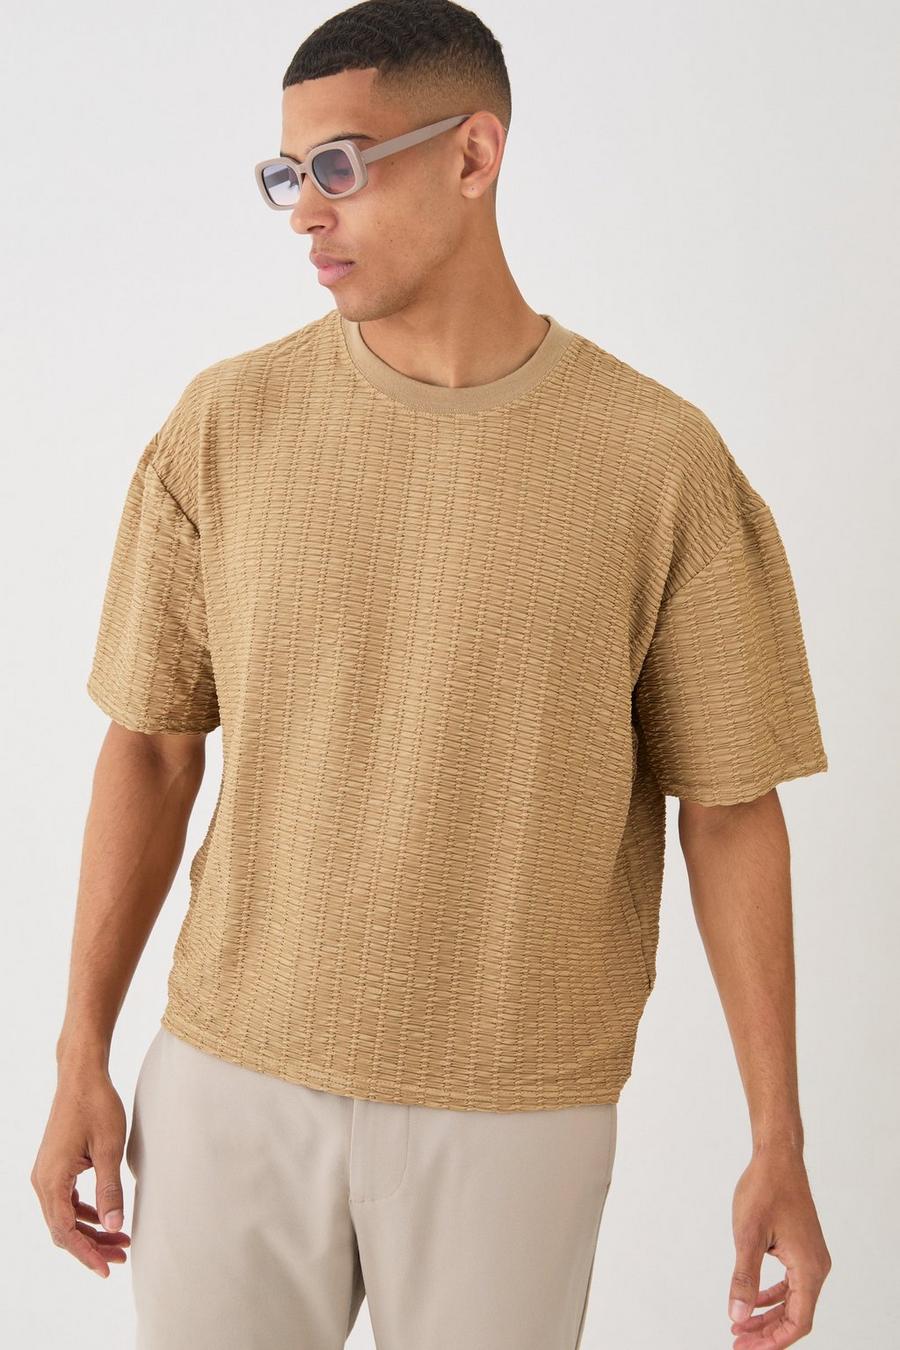 Tan Oversized Boxy Pleated Texture T-shirt image number 1